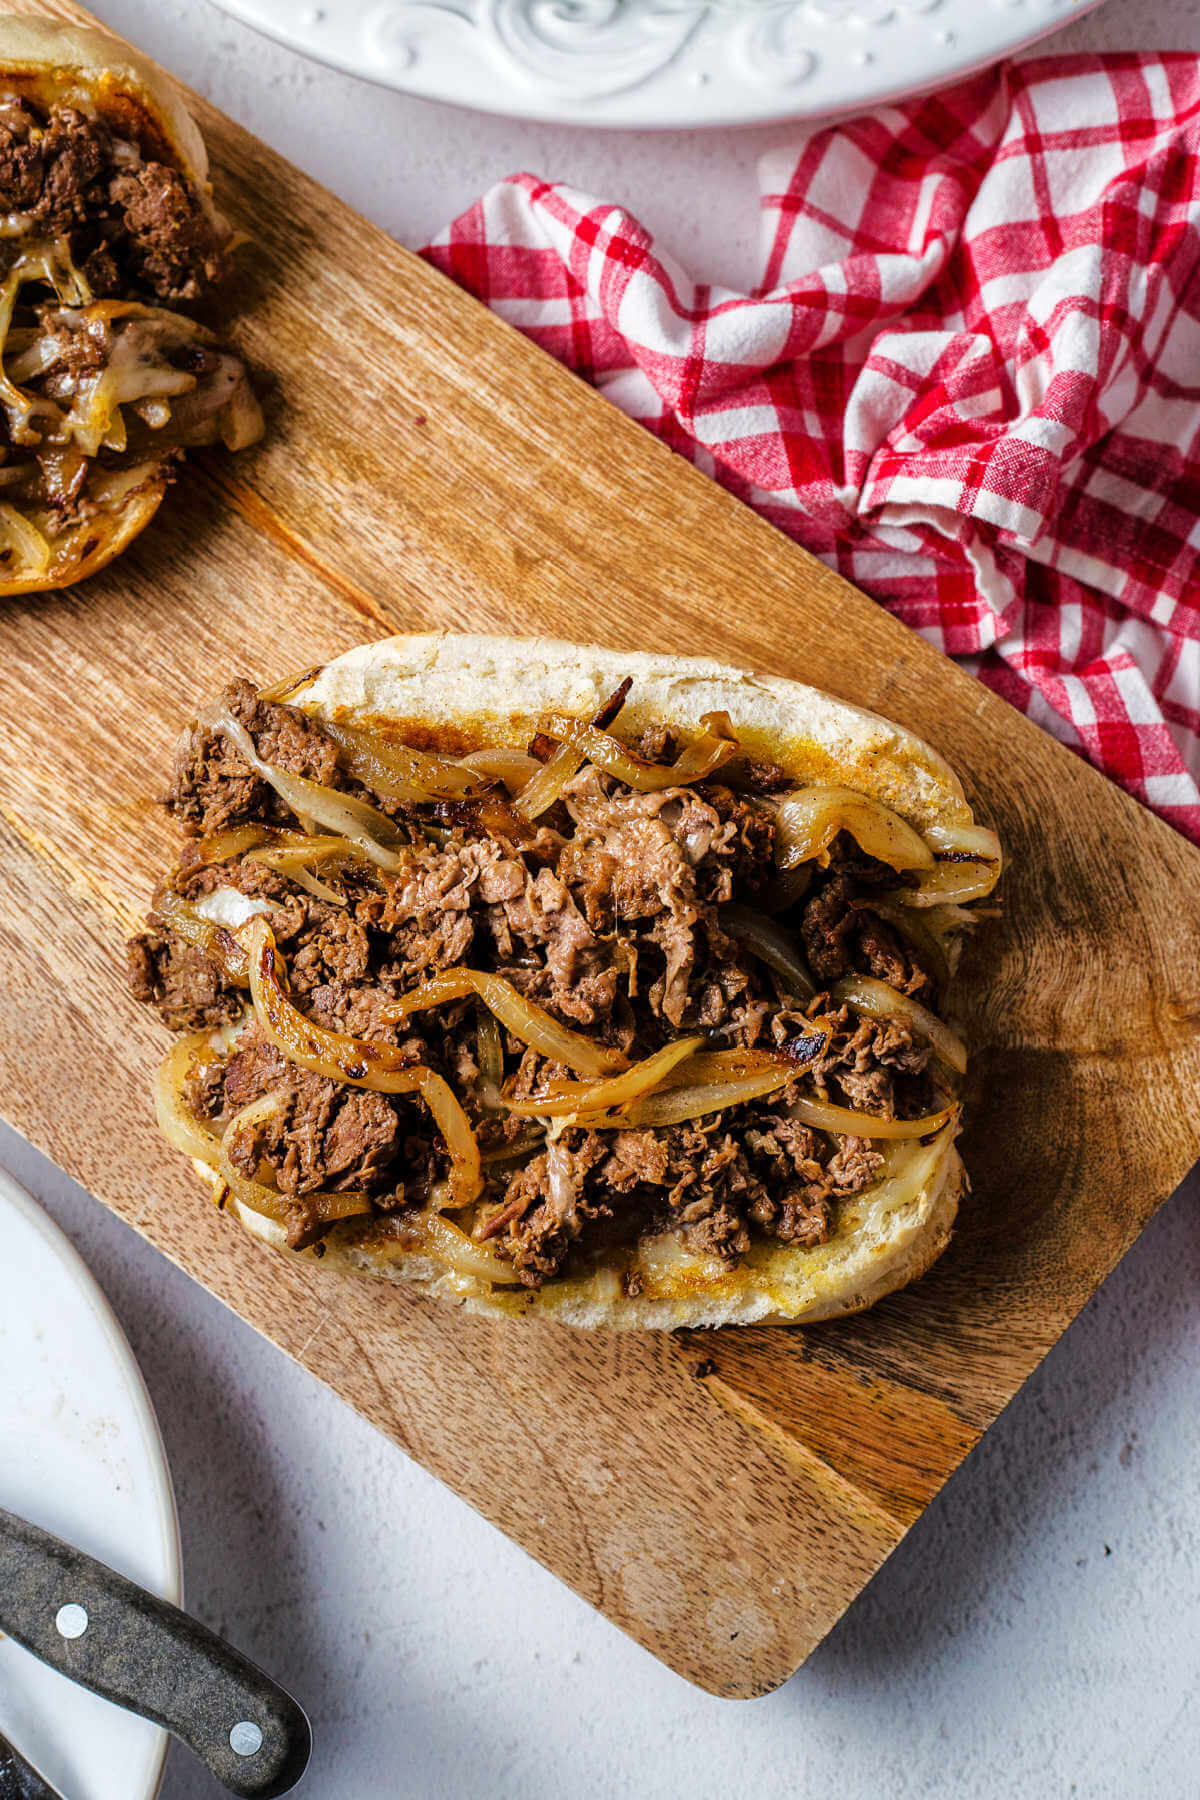 an open-face philly cheesesteak sandwich on a wooden board on a table.